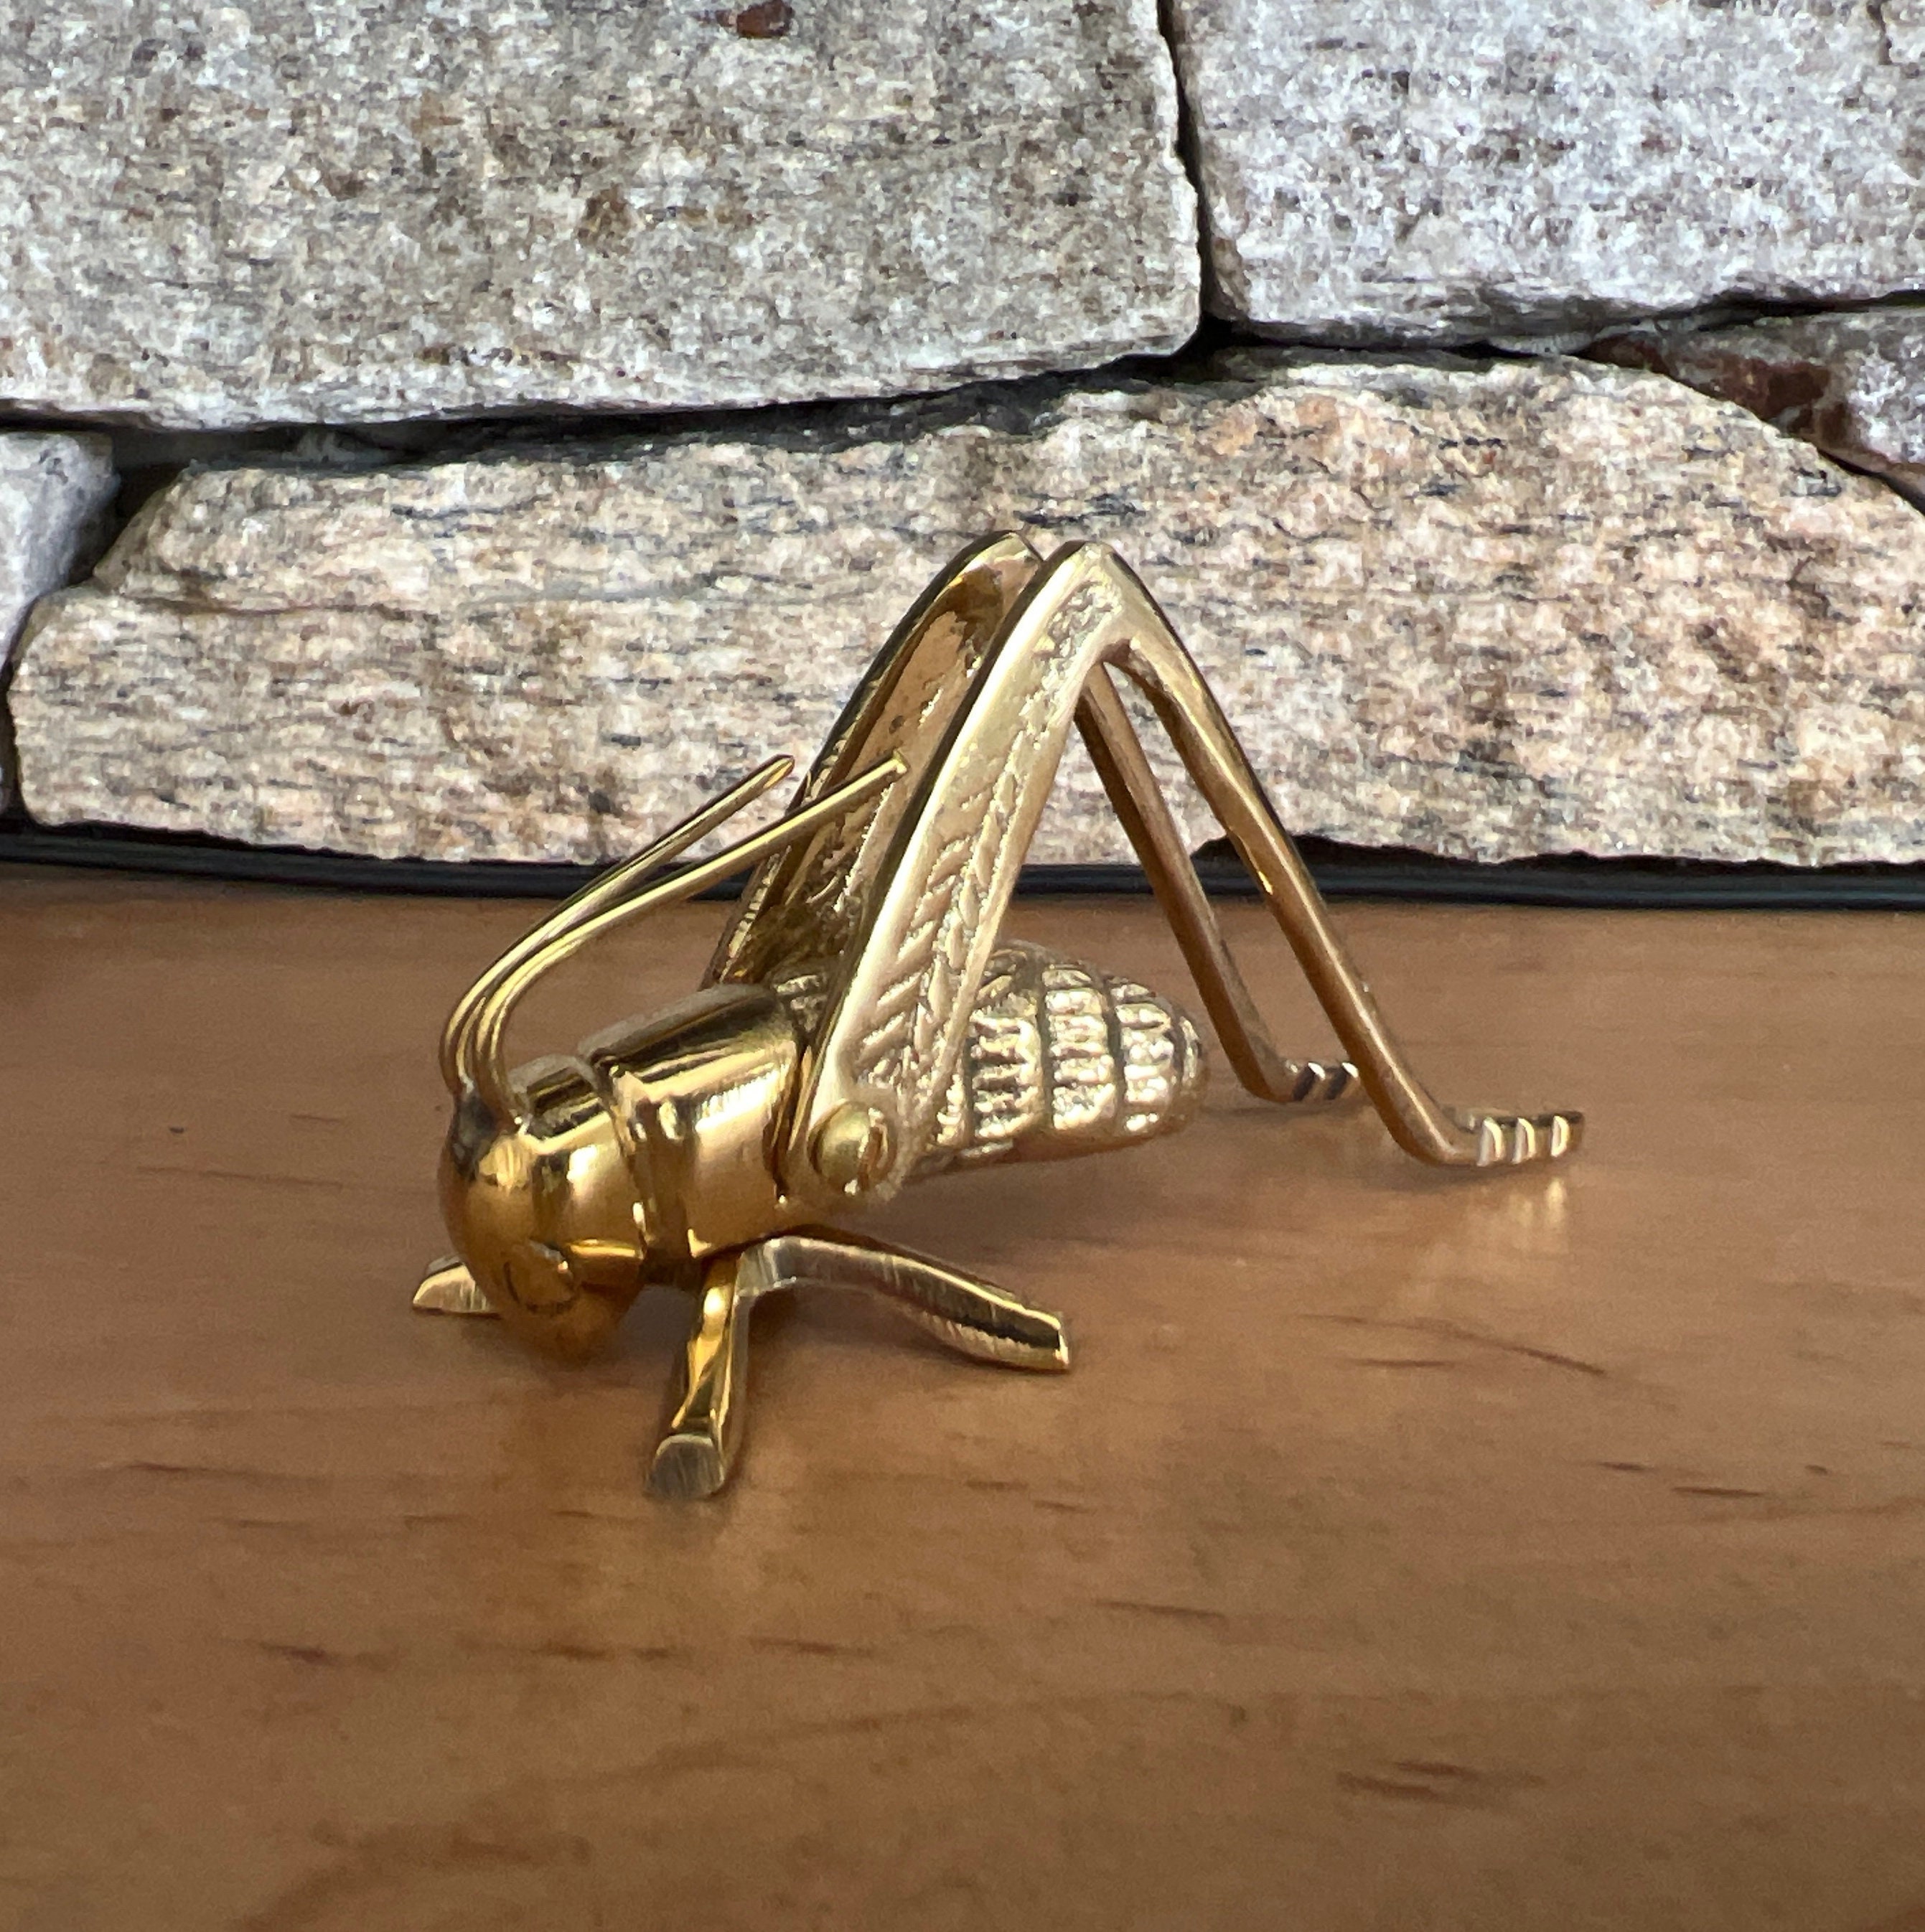 Vintage Brass Grasshopper Paperweight/Figurine/Oddity with movable